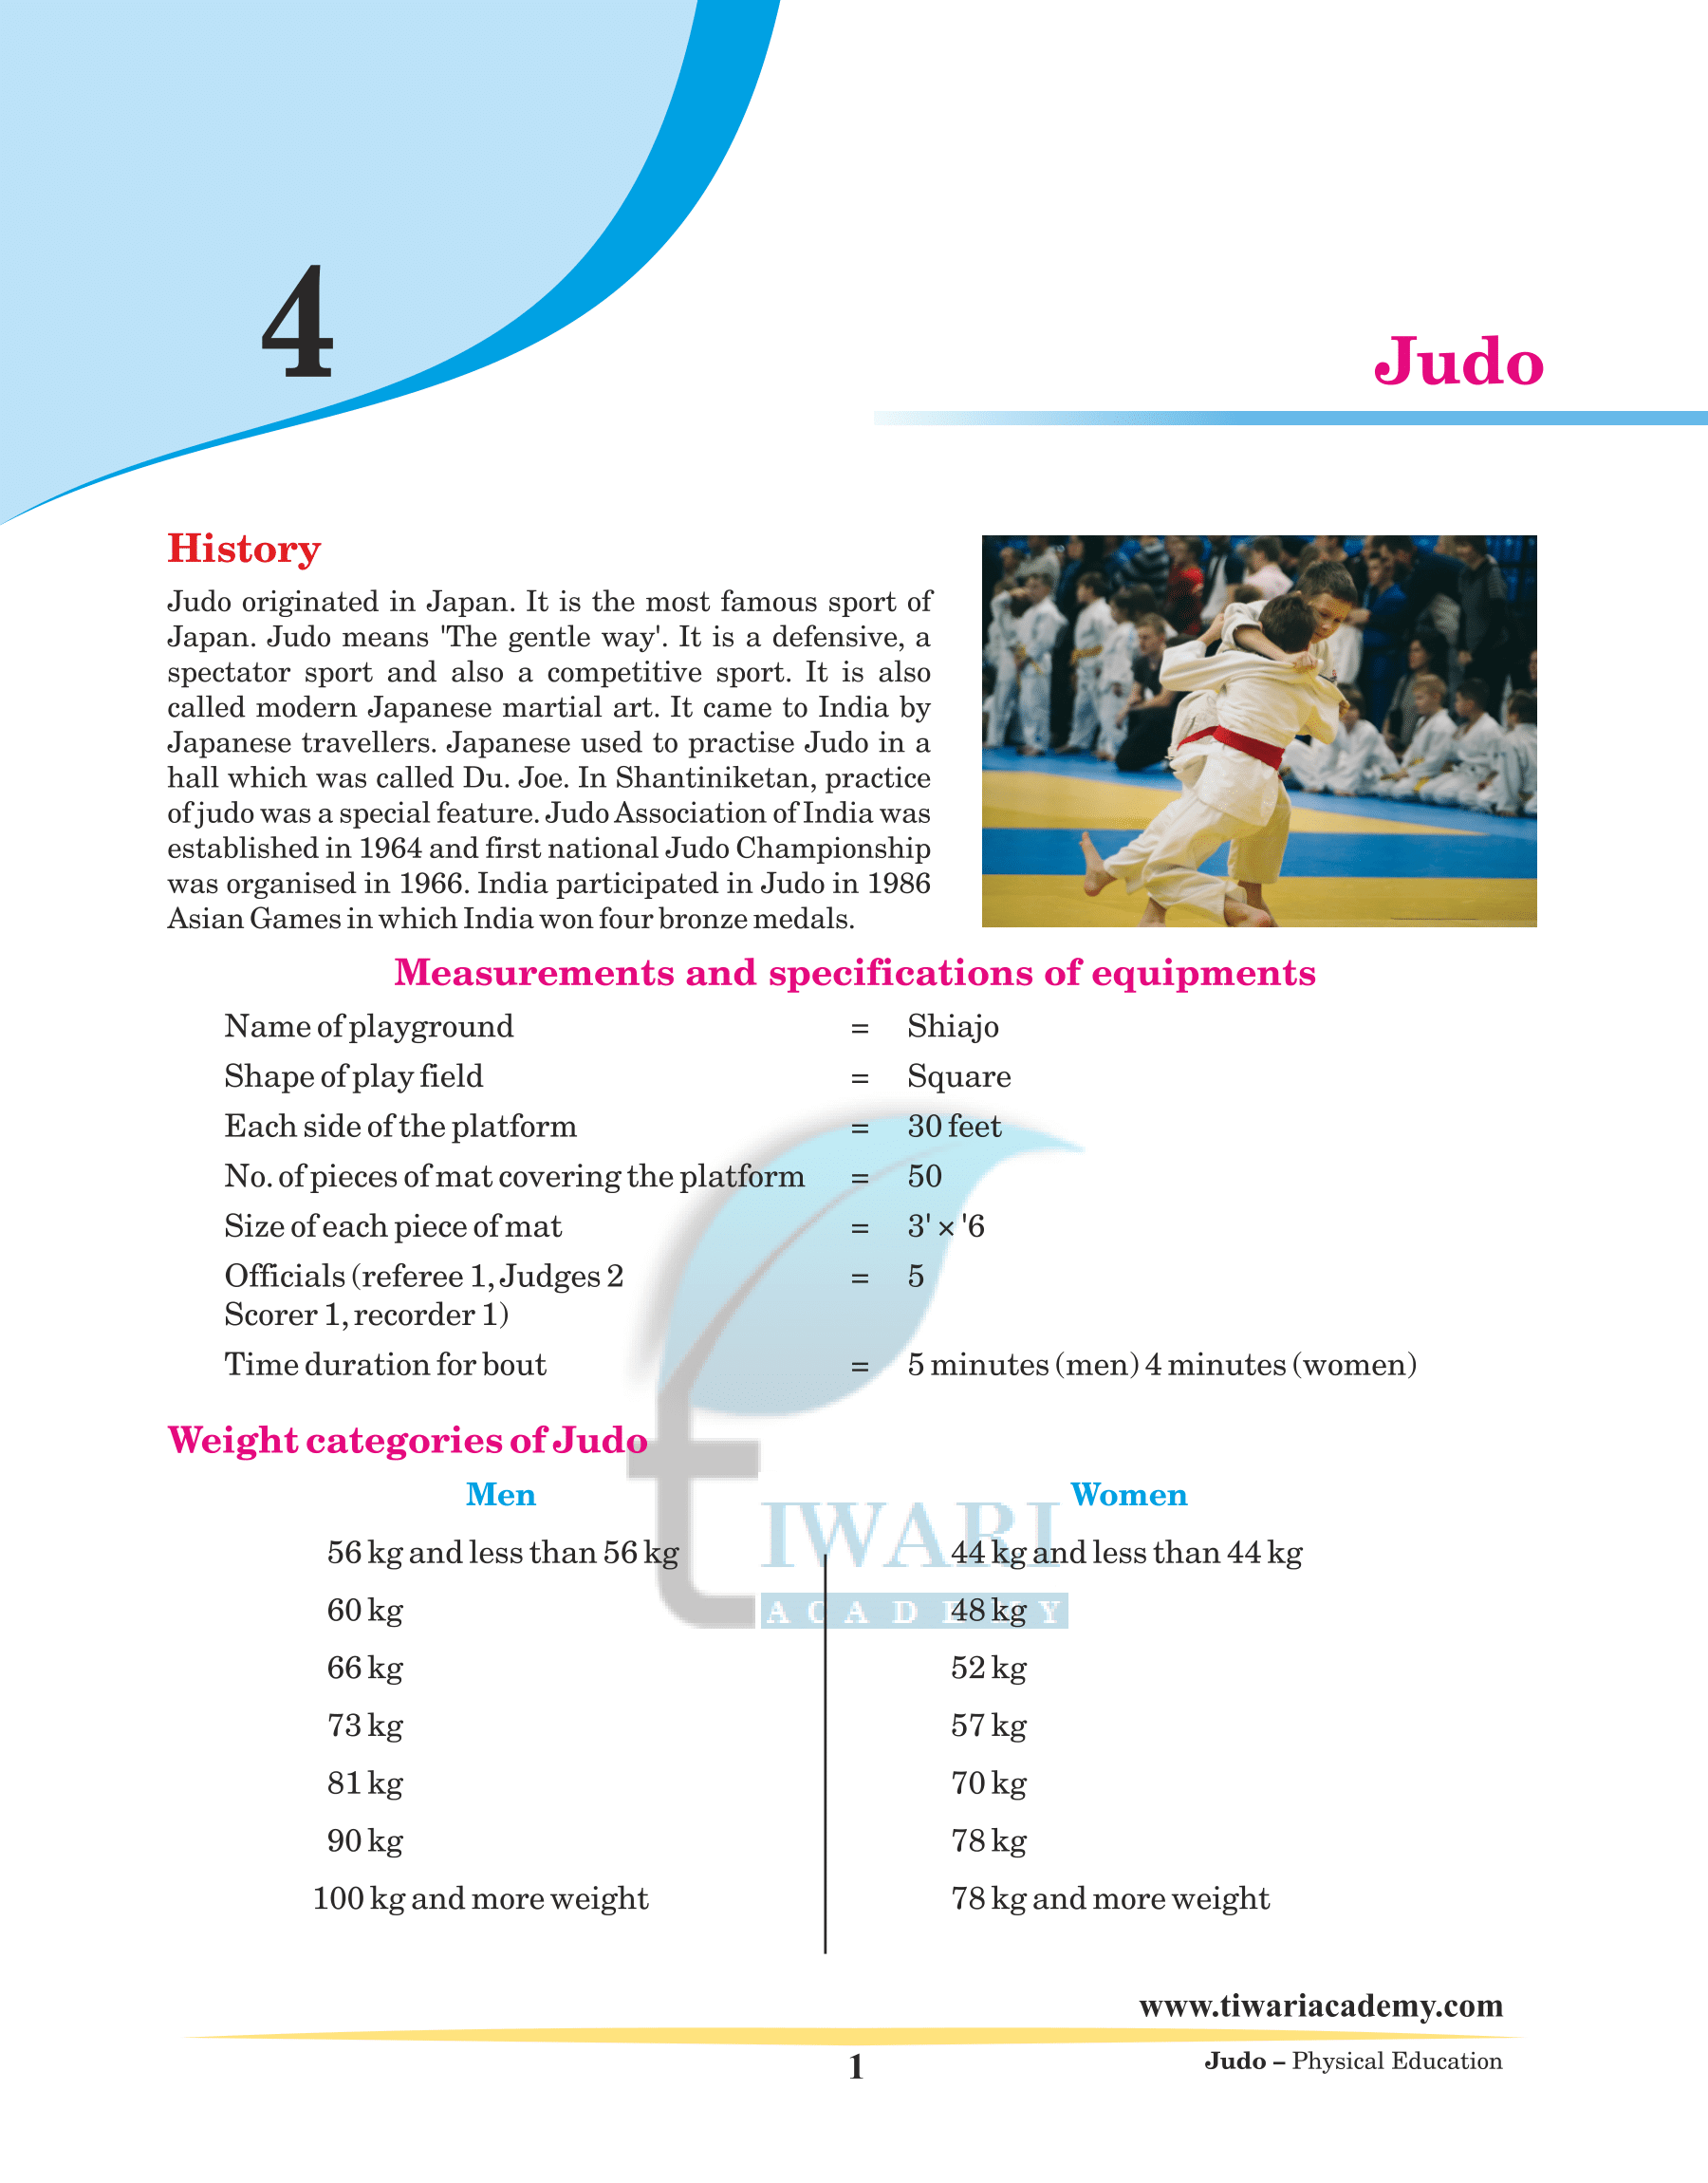 How to play Judo?